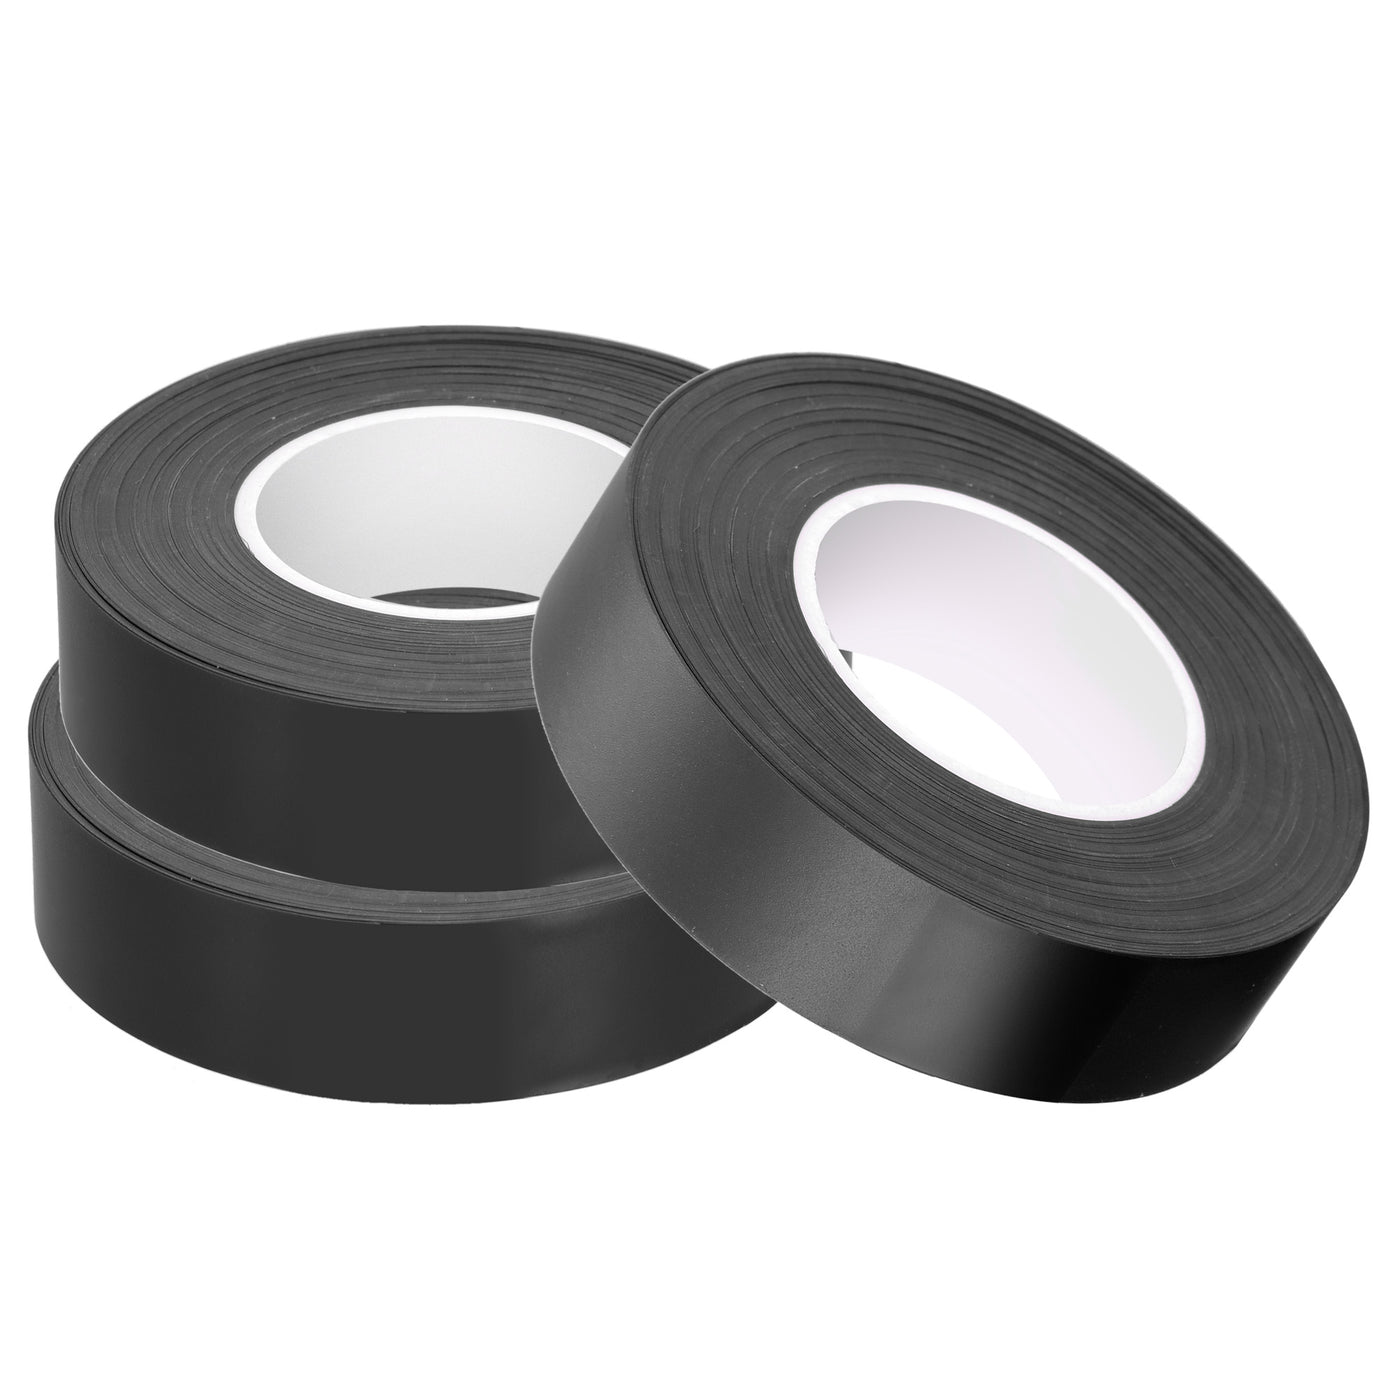 uxcell Uxcell PVC Flagging Tape 20mm x 20m/65.6ft Marking Tape Non-Adhesive Black 3pcs